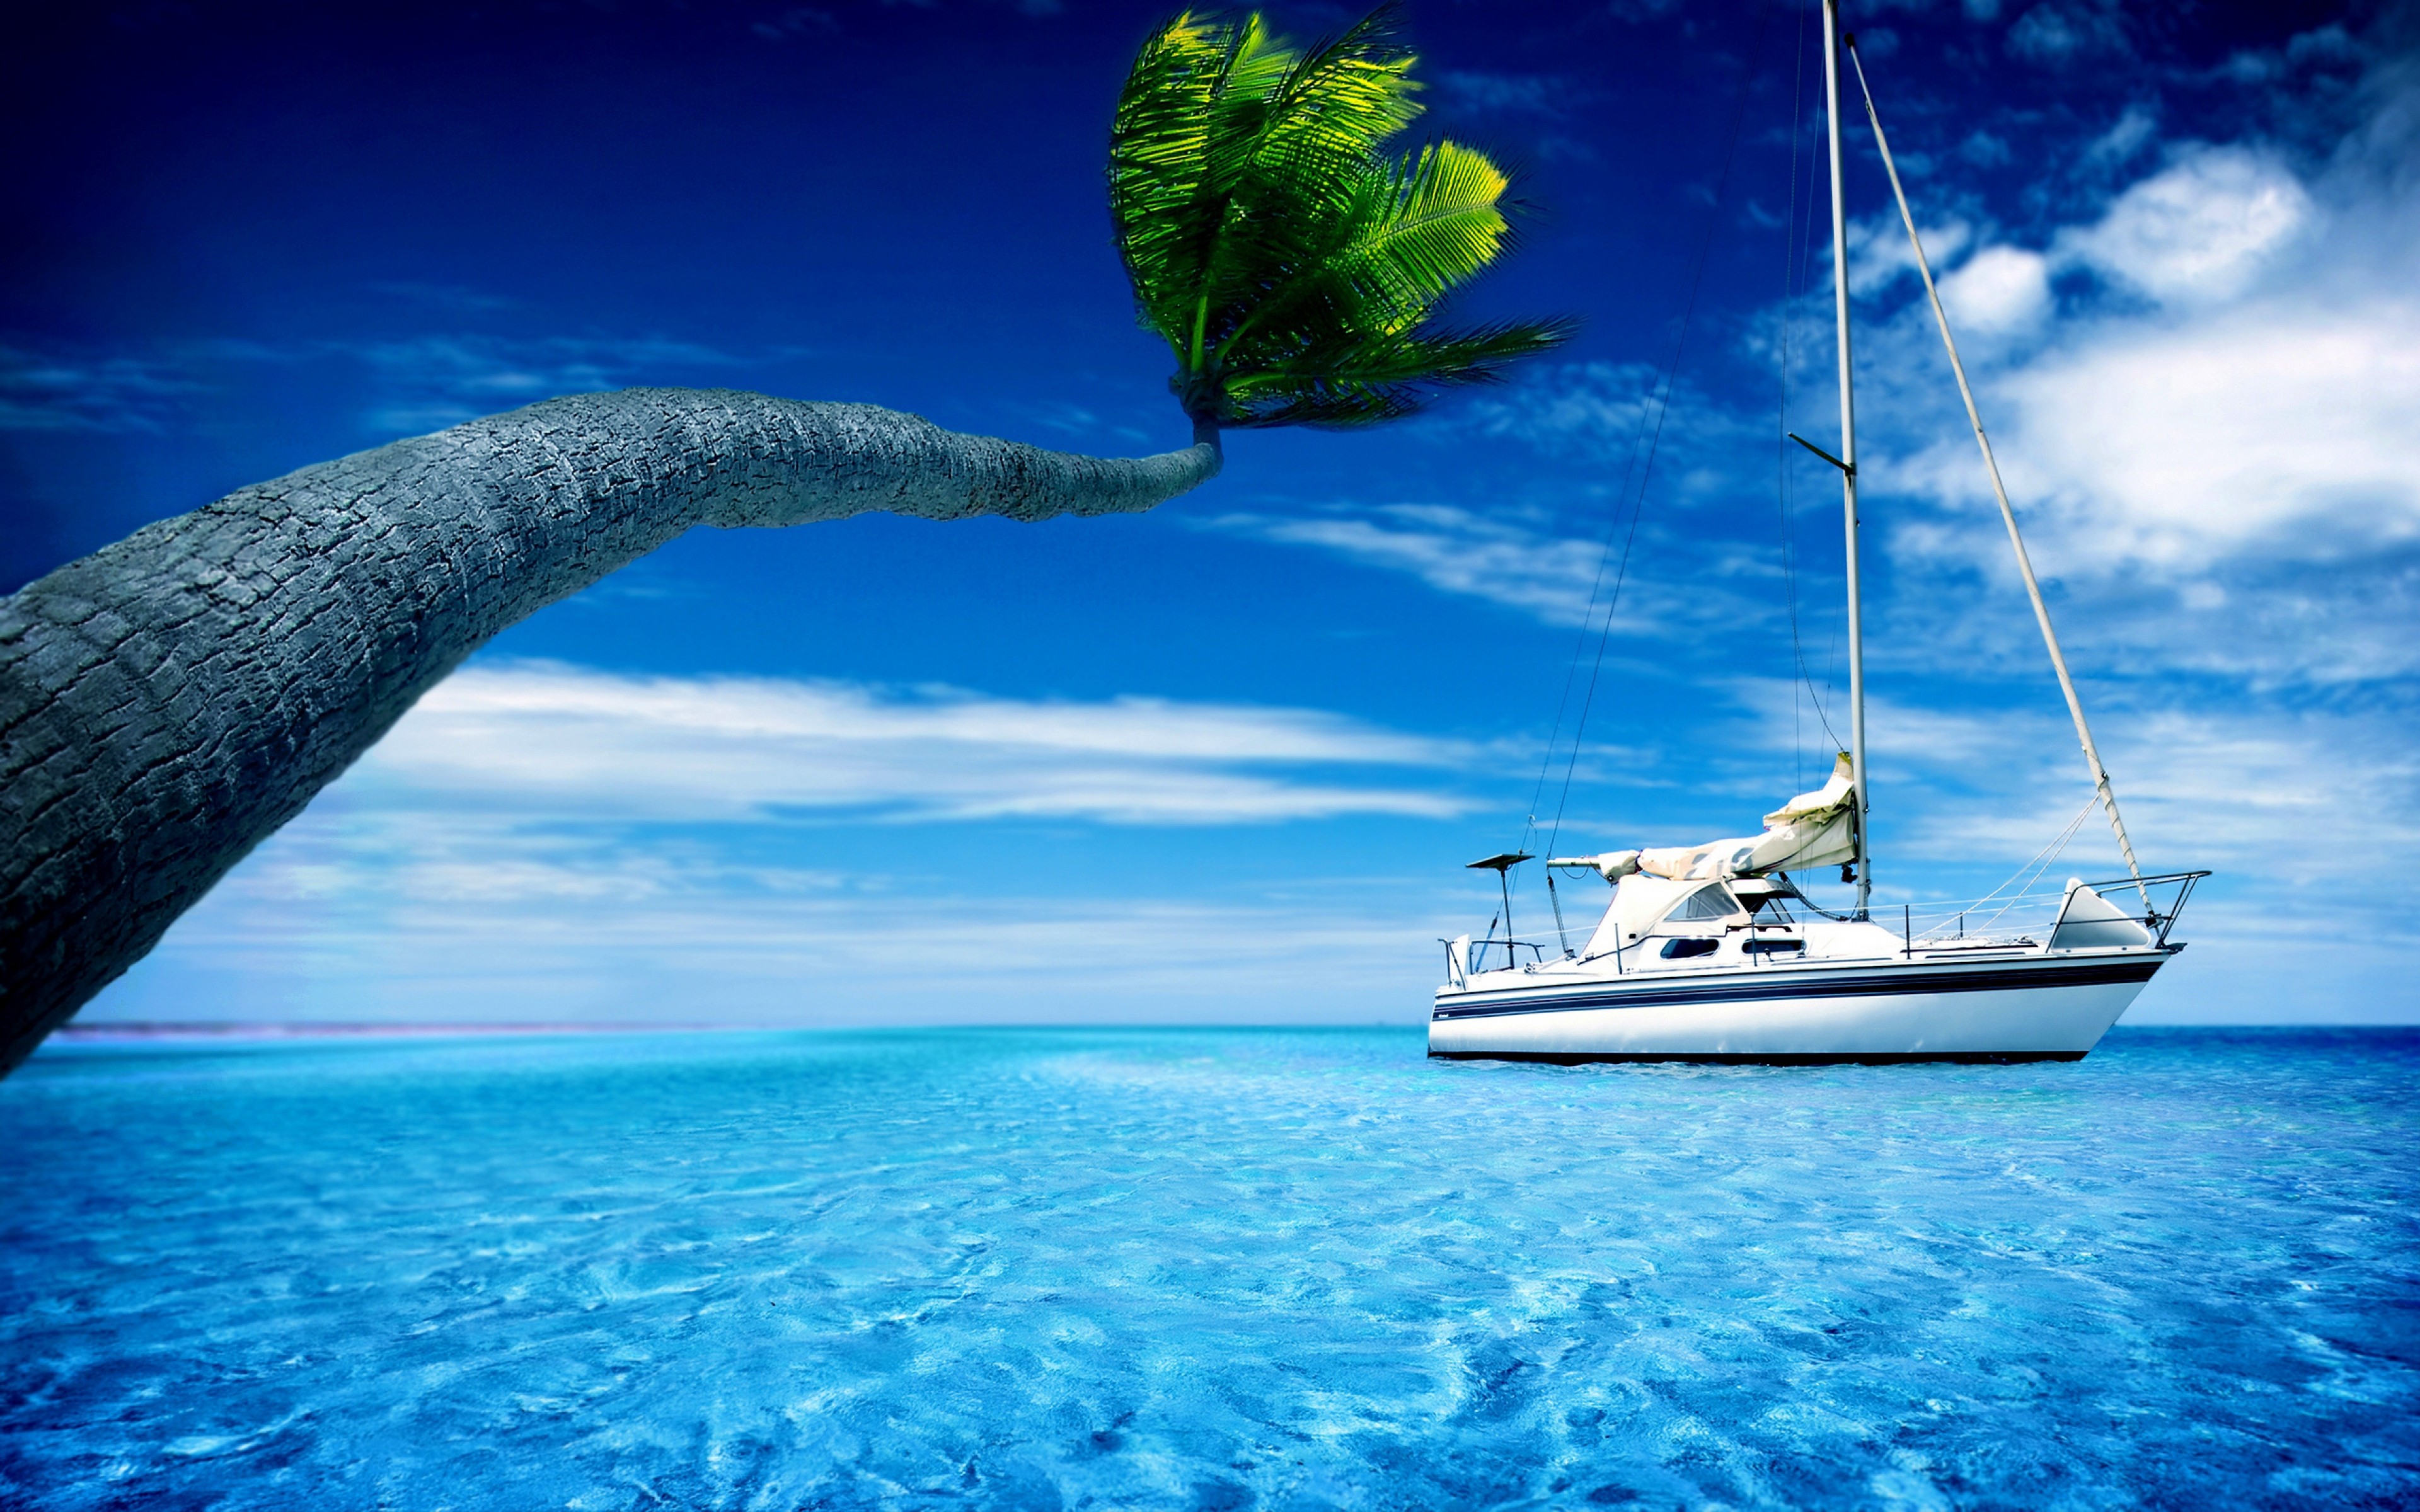 General 3840x2400 yacht boat sea palm trees vehicle clouds water outdoors plants